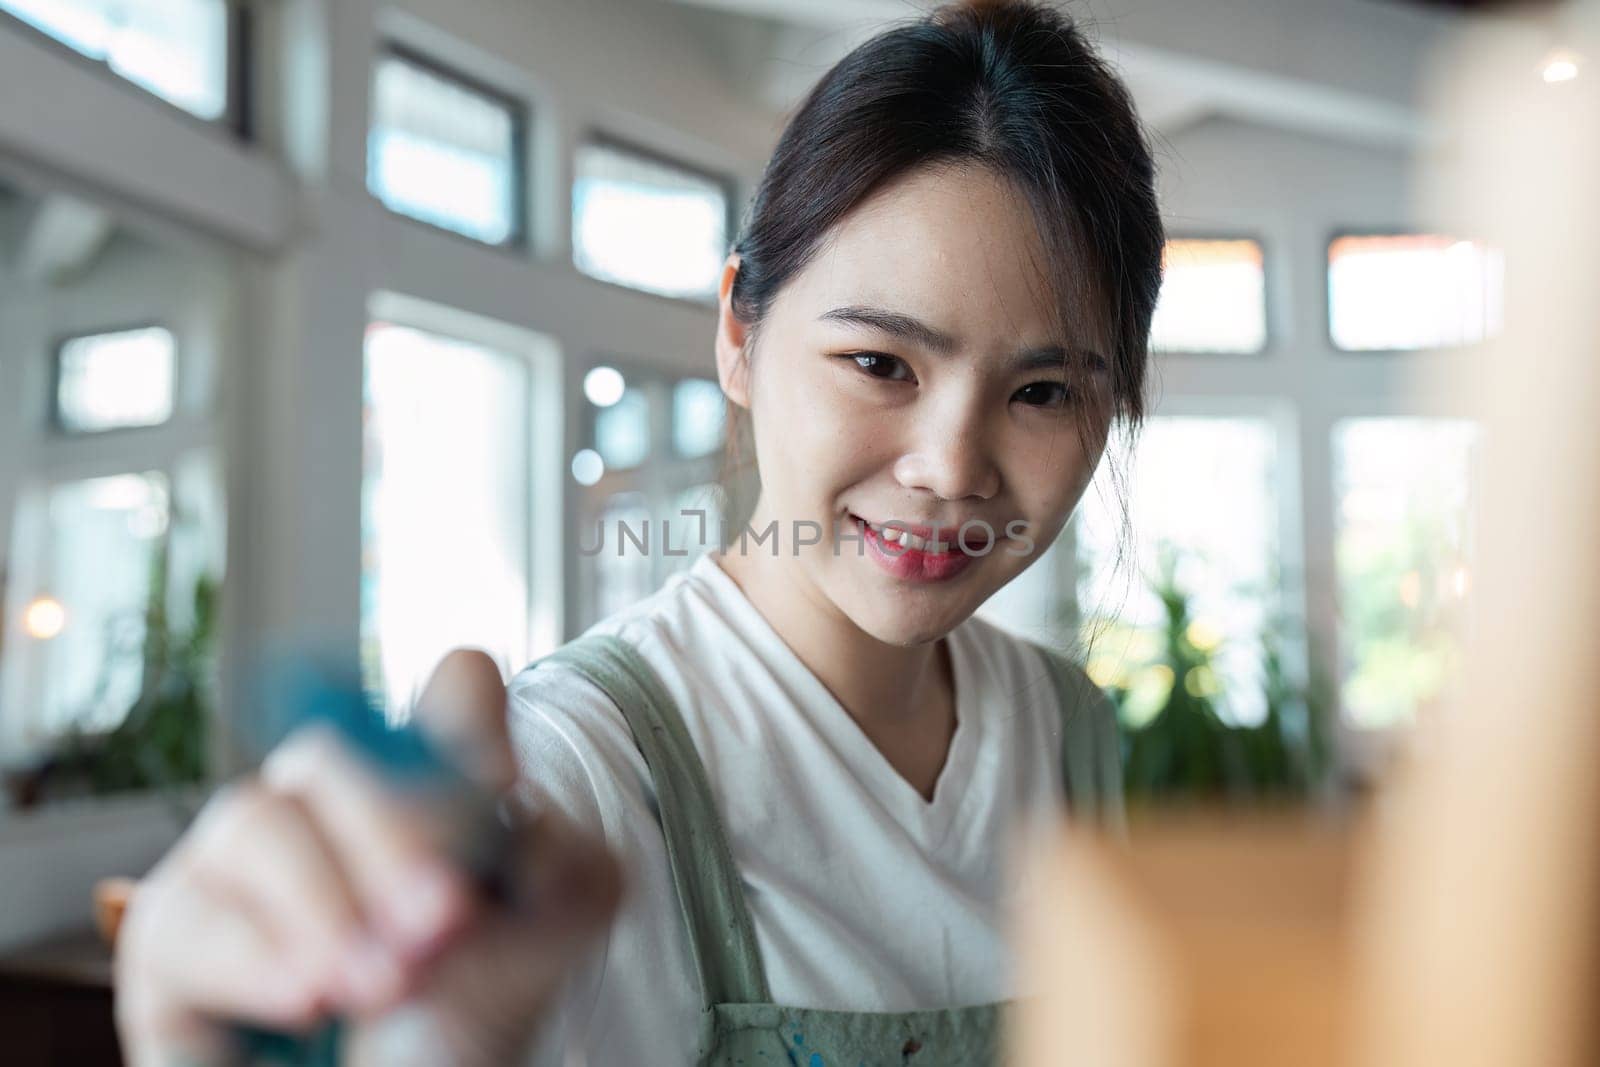 Young Woman Enjoying Creative Hobby Indoors - Smiling Female Engaged in Artistic Activity at Home - Bright and Airy Room with Natural Light - Focus on Leisure and Personal Development by itchaznong